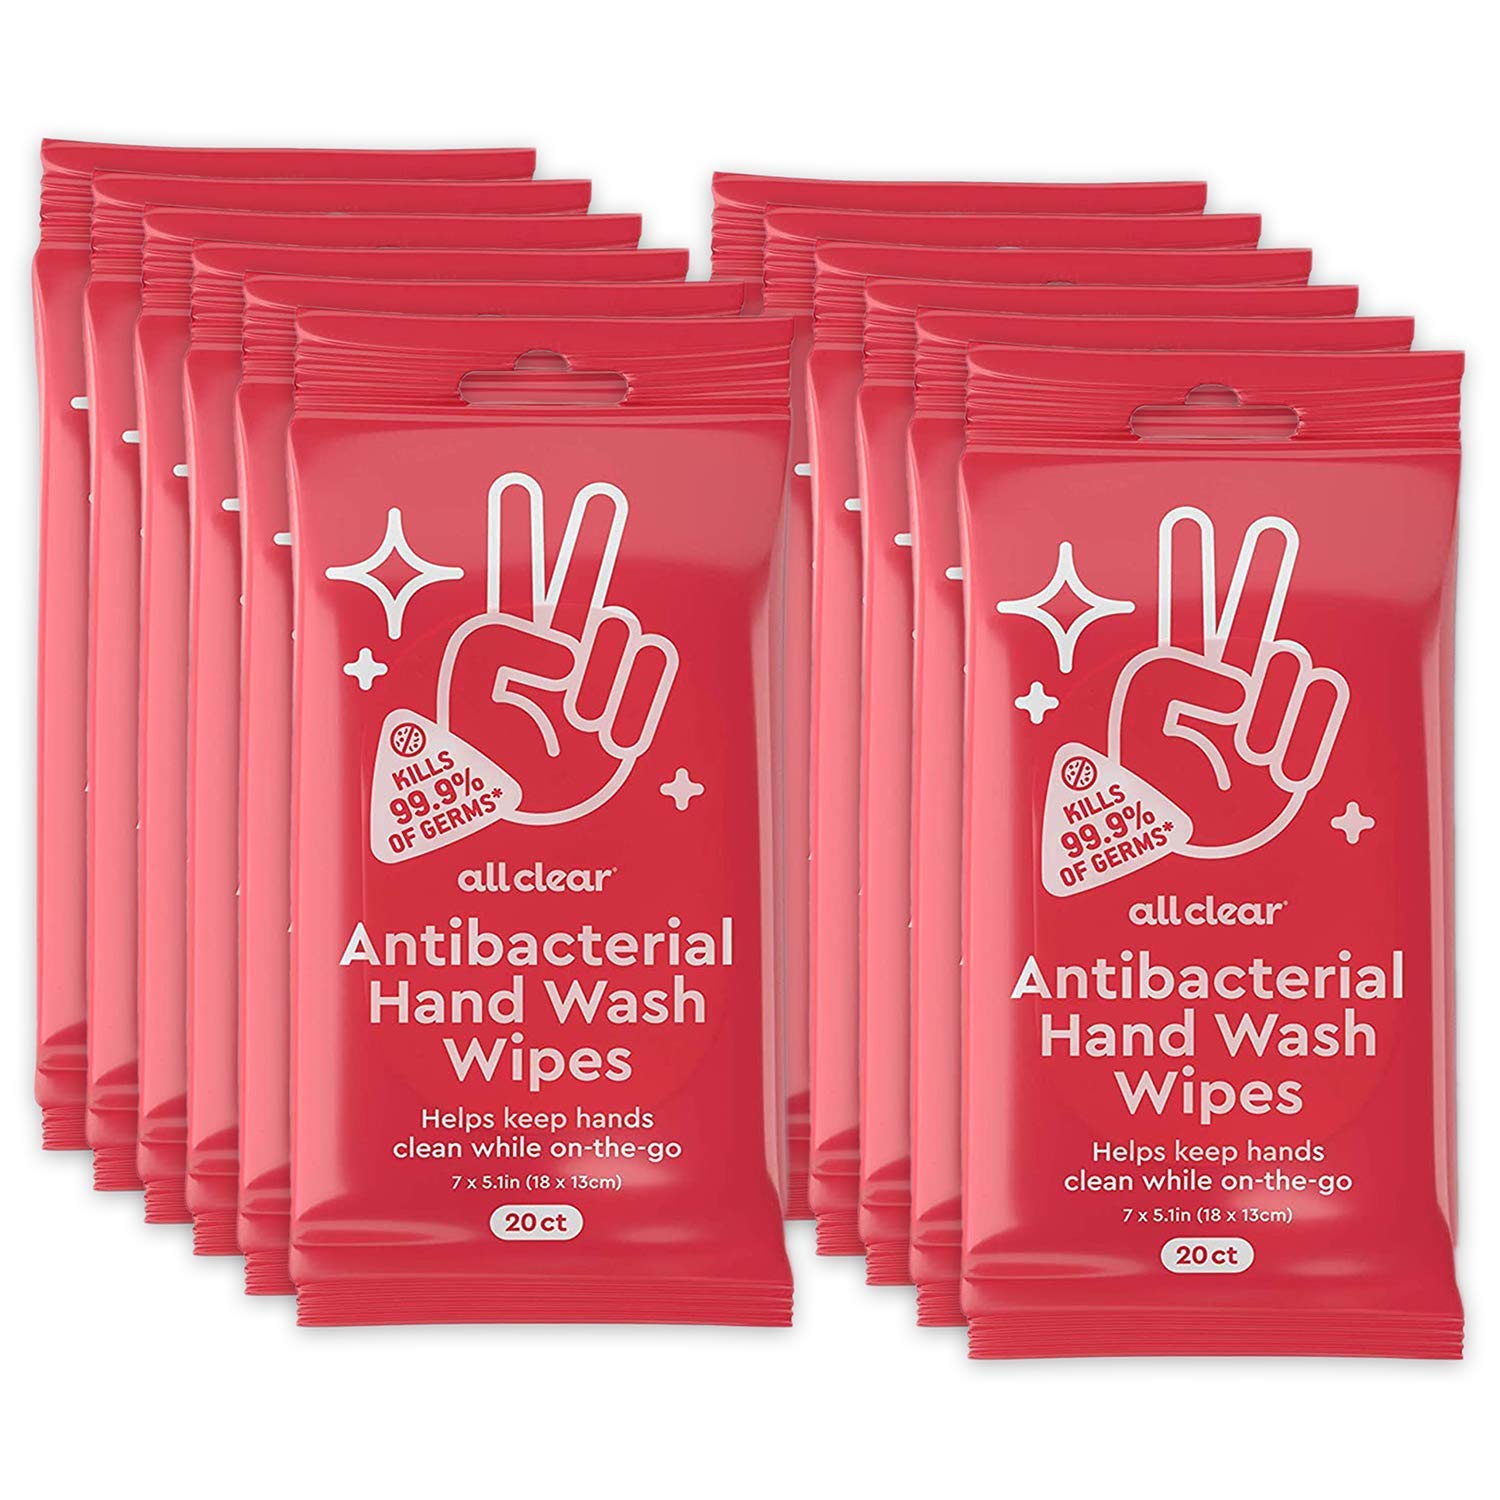 All Clear Antibacterial Hand Wash Wipes | 20 Count (Pack of 12) 240 Total Hand Sanitizing Wipes